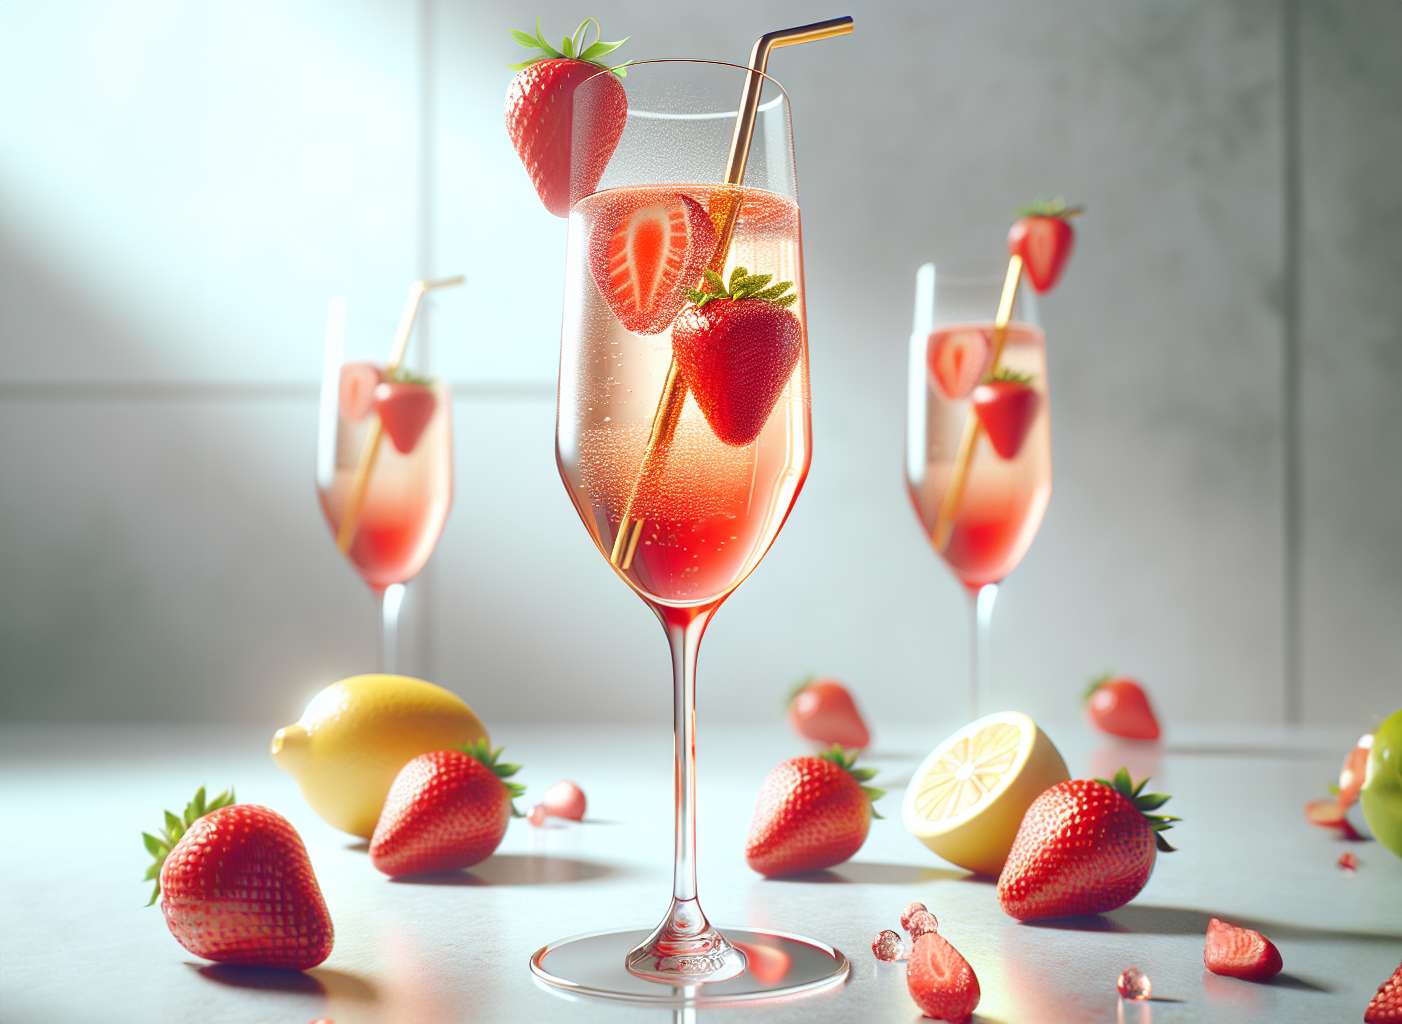 Sparkling rose wine in elegant glasses adorned with strawberries, accompanied by pomegranate seeds and citrus fruits on a light surface.